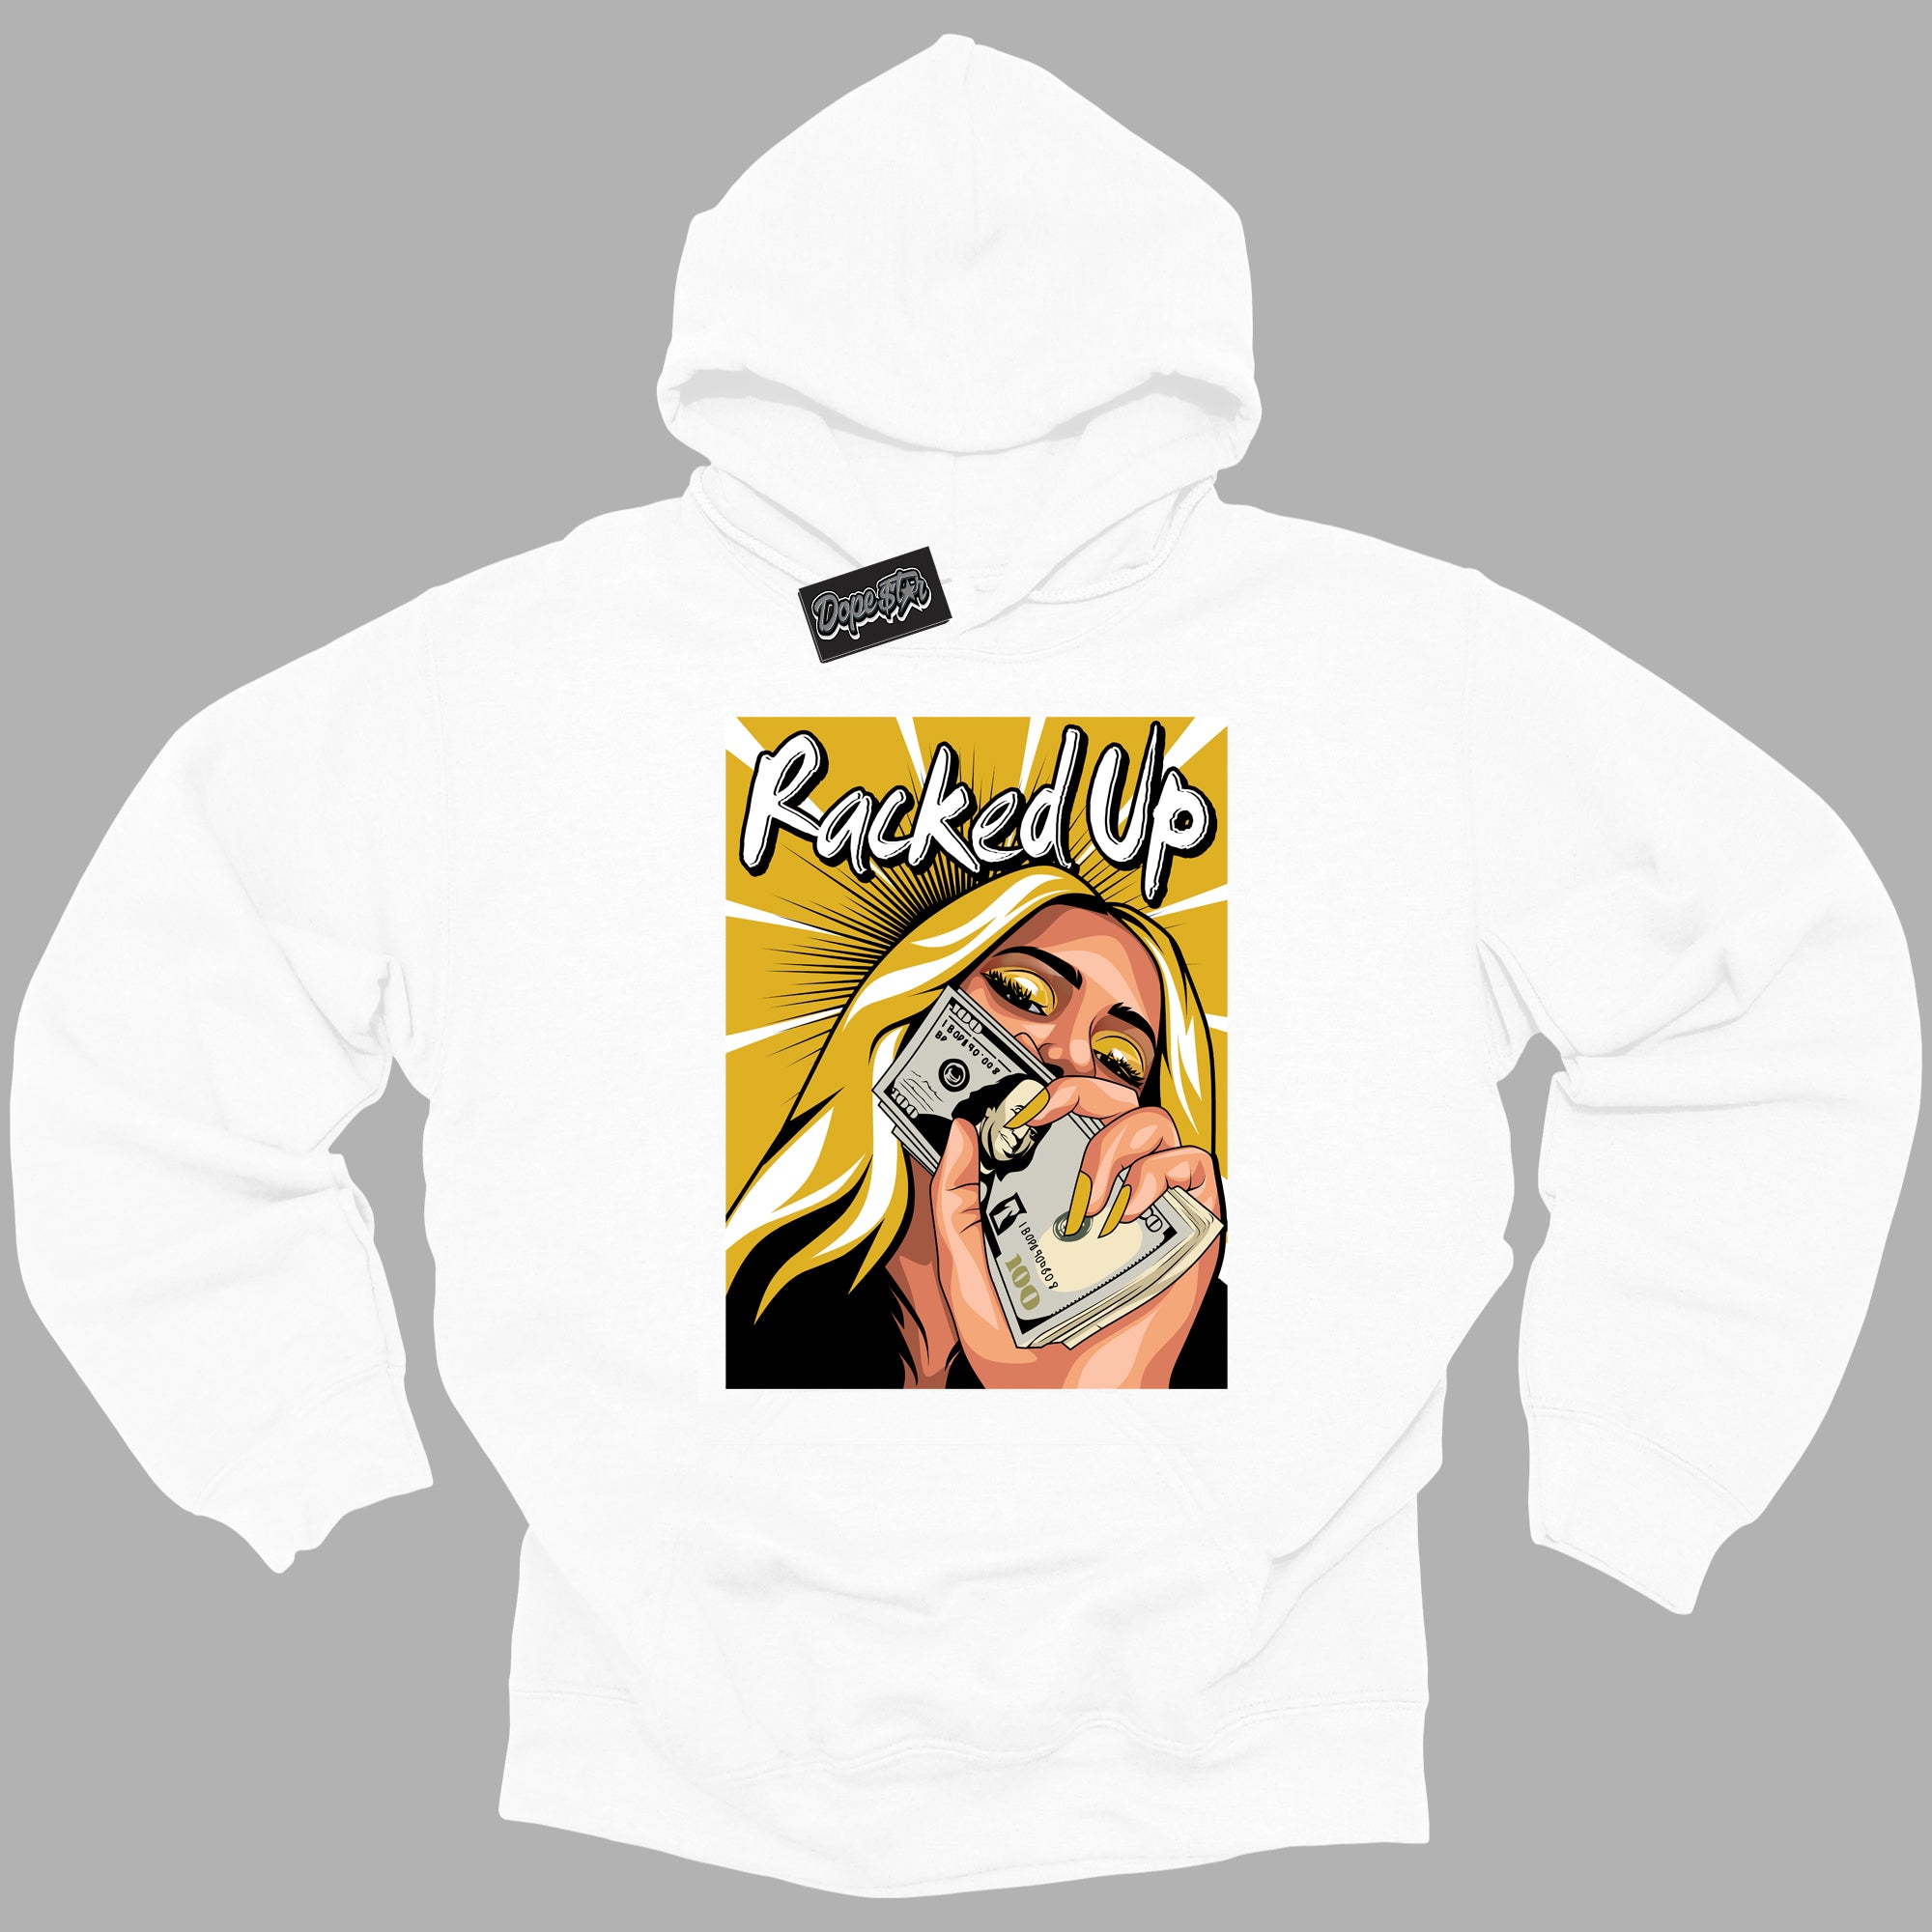 Cool White Hoodie with “Racked Up ”  design that Perfectly Matches Yellow Ochre 6s Sneakers.